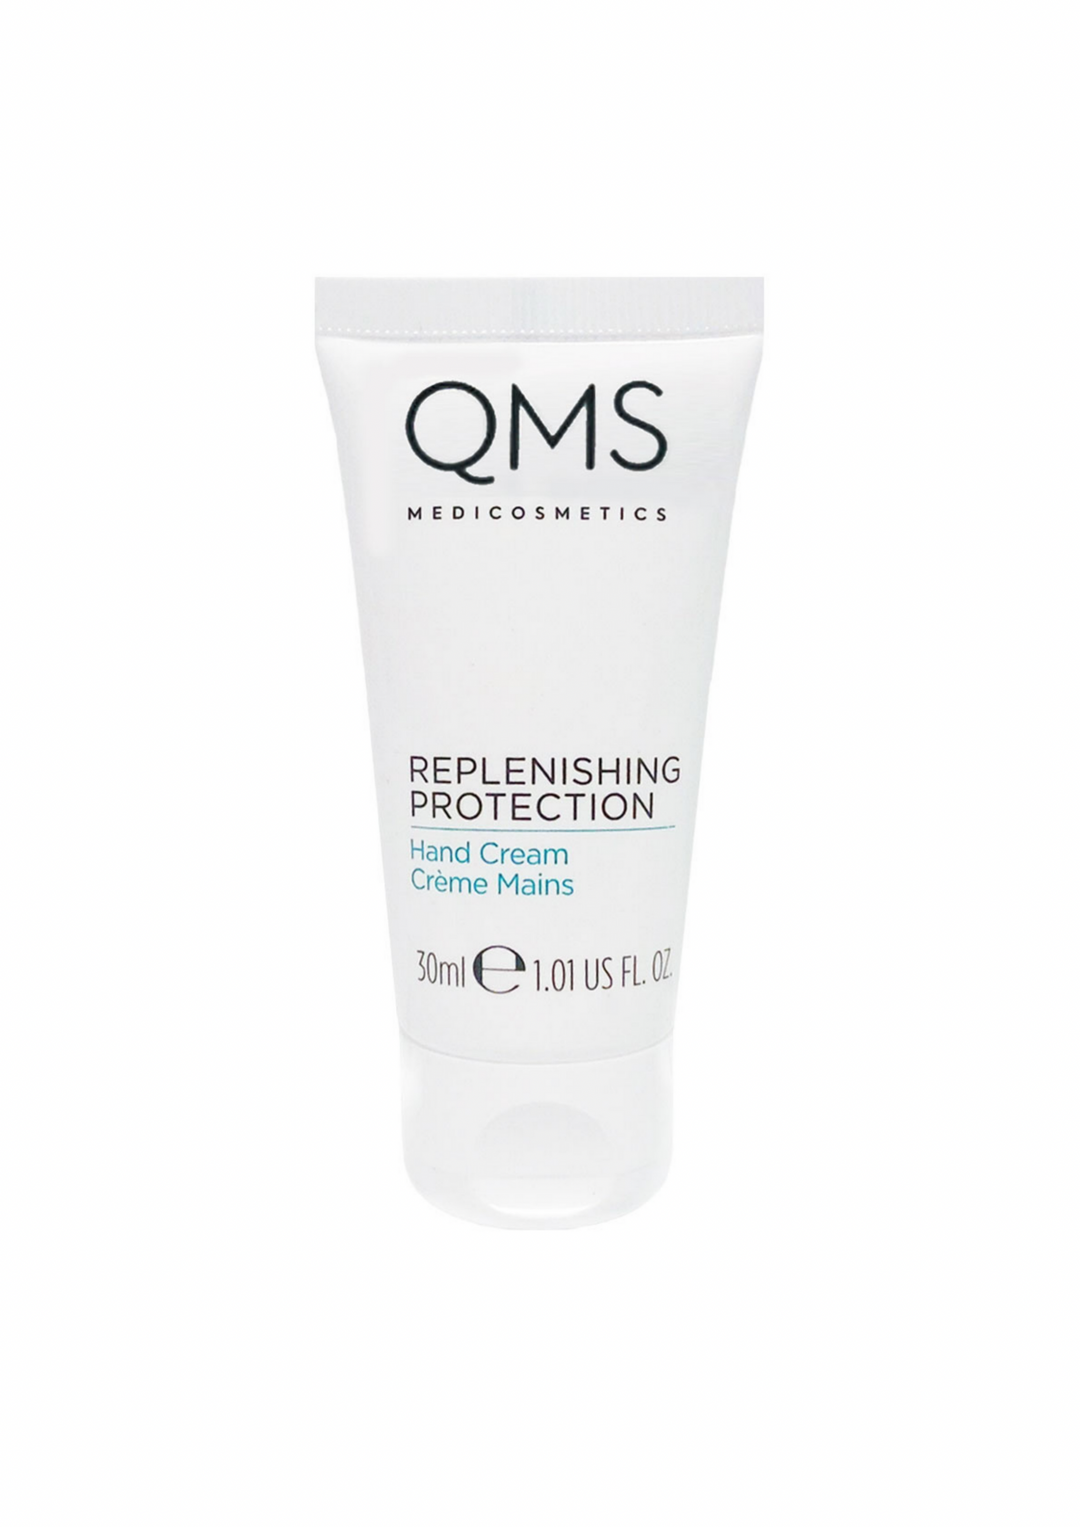 Replenishing Protection Hand Cream 30 ml (discover size)